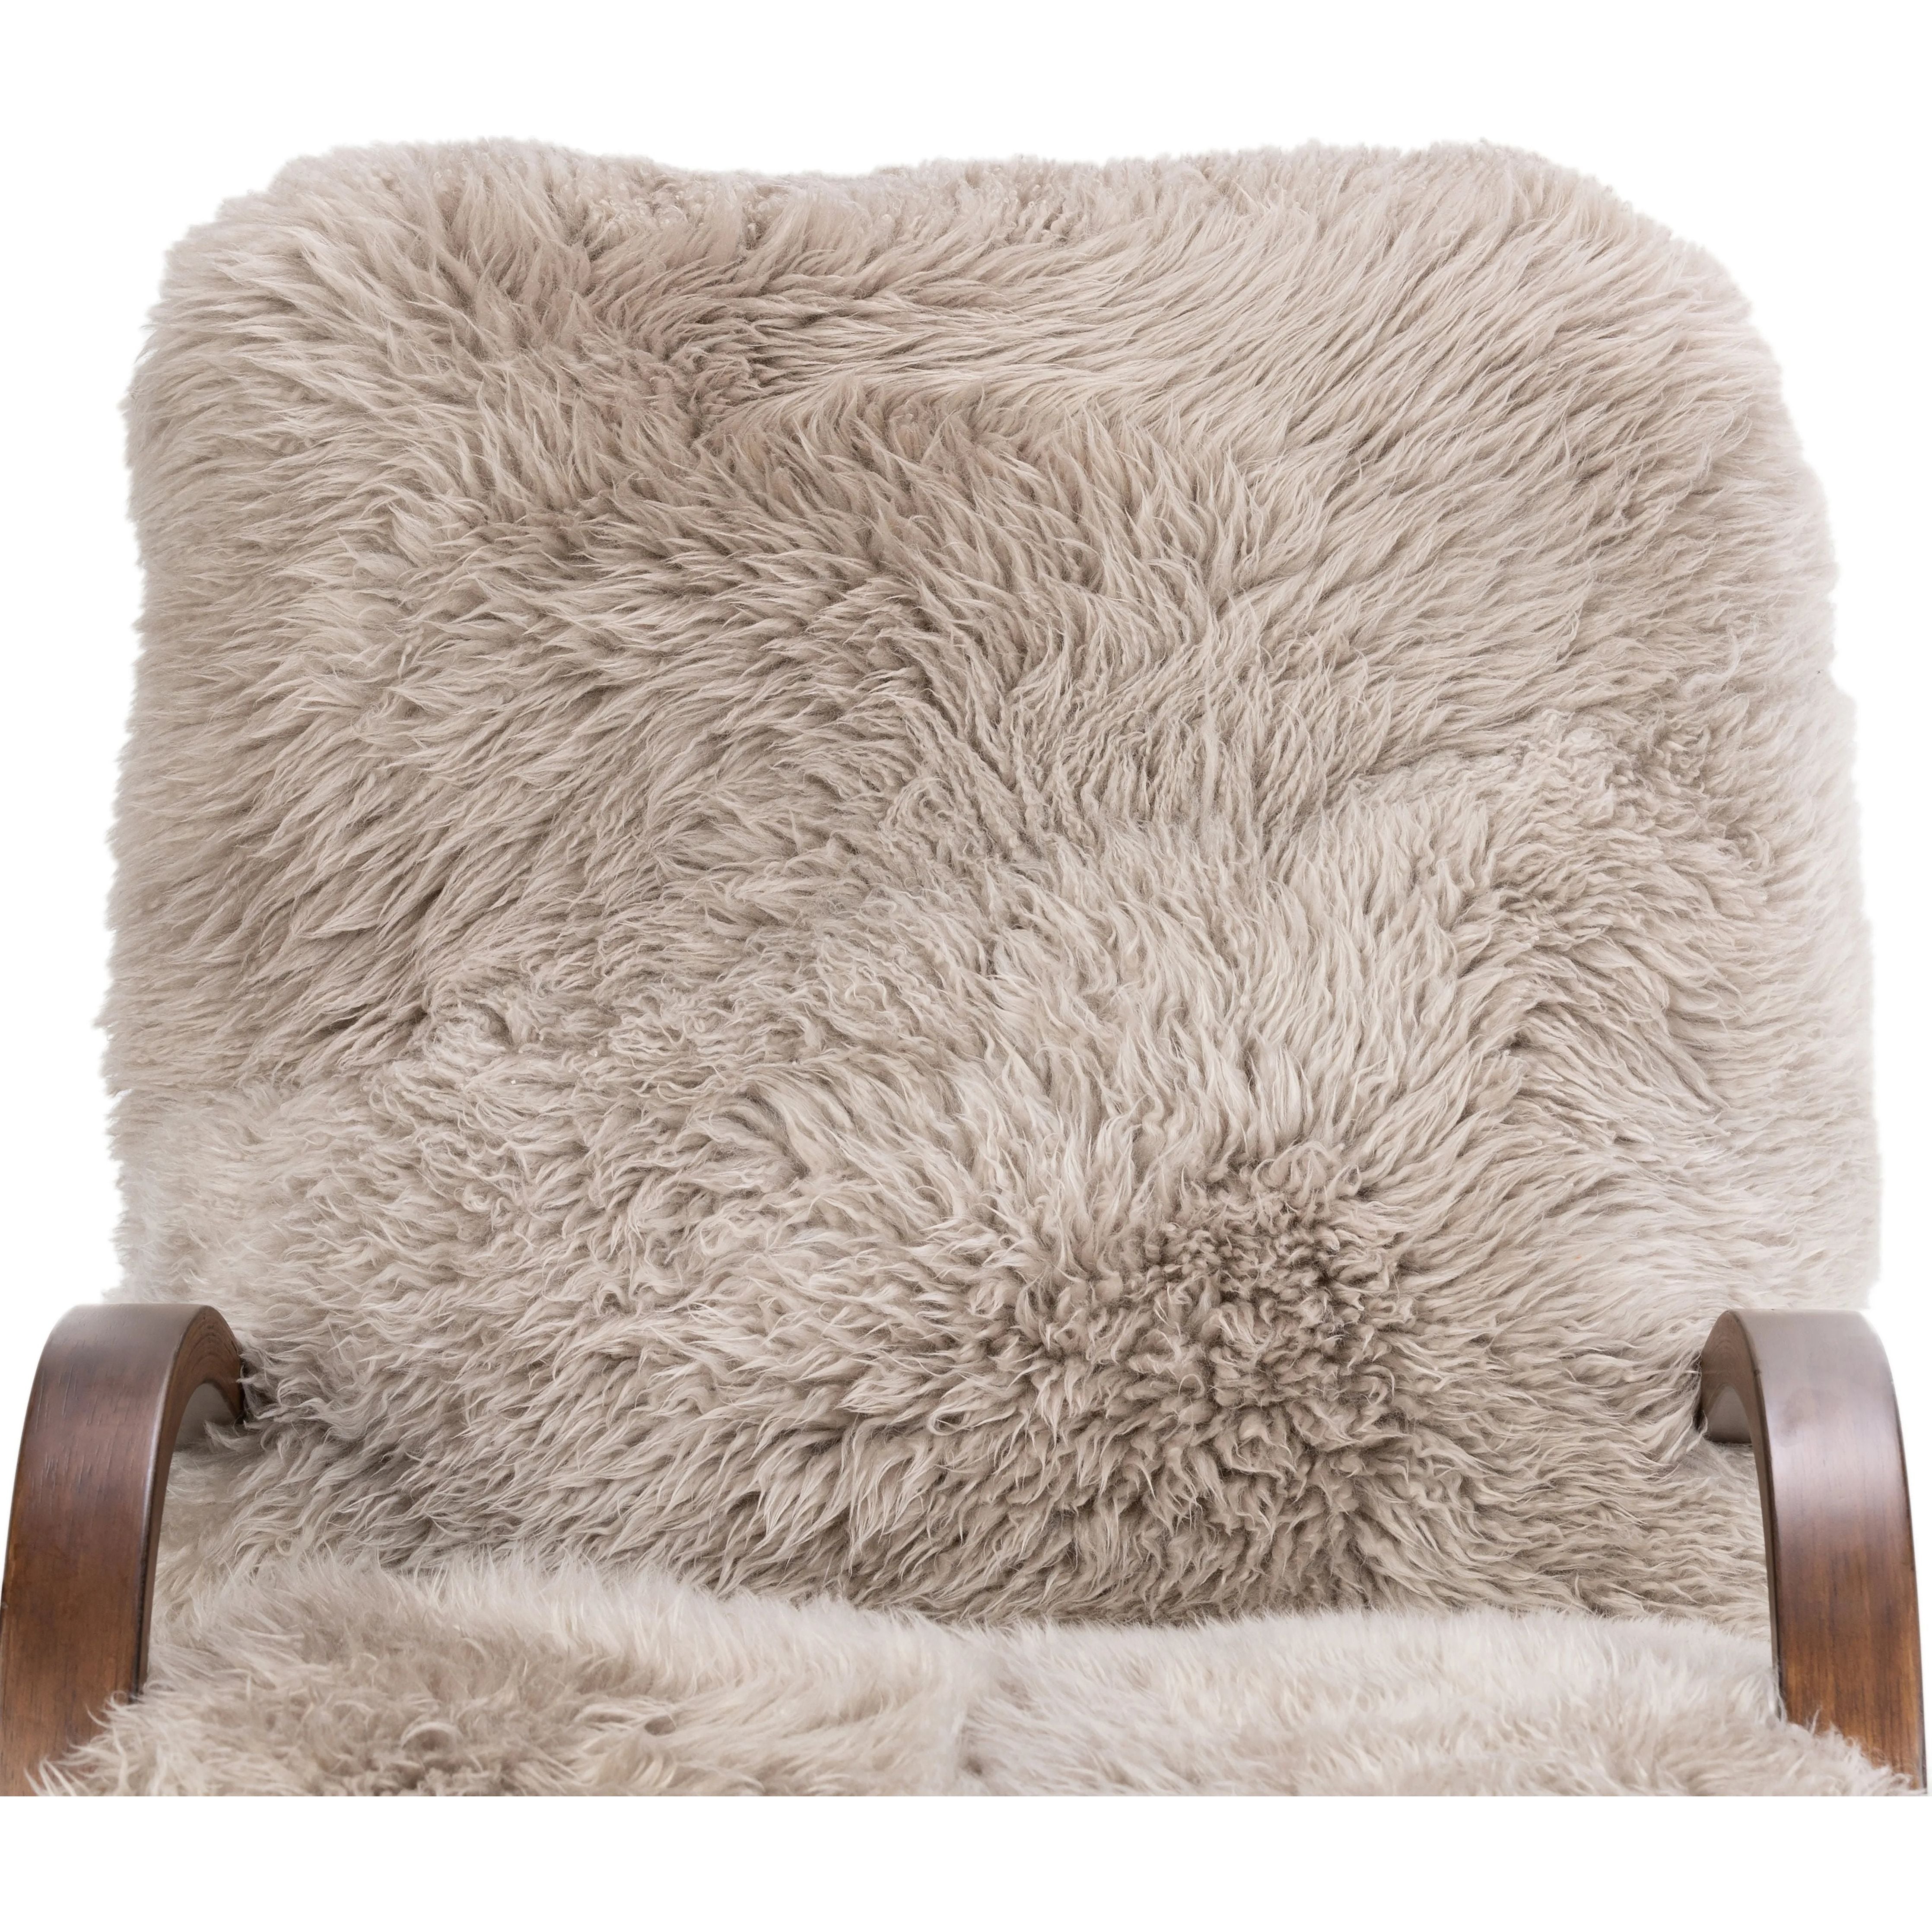 Ethically sourced authentic Mongolian sheepskin covers this unique statement chair, featuring removable feather-foam cushions. A cantilever-like wooden frame pairs with a webbed suspension seat to offer a true sink-in sit Amethyst Home provides interior design, new home construction design consulting, vintage area rugs, and lighting in the Miami metro area.